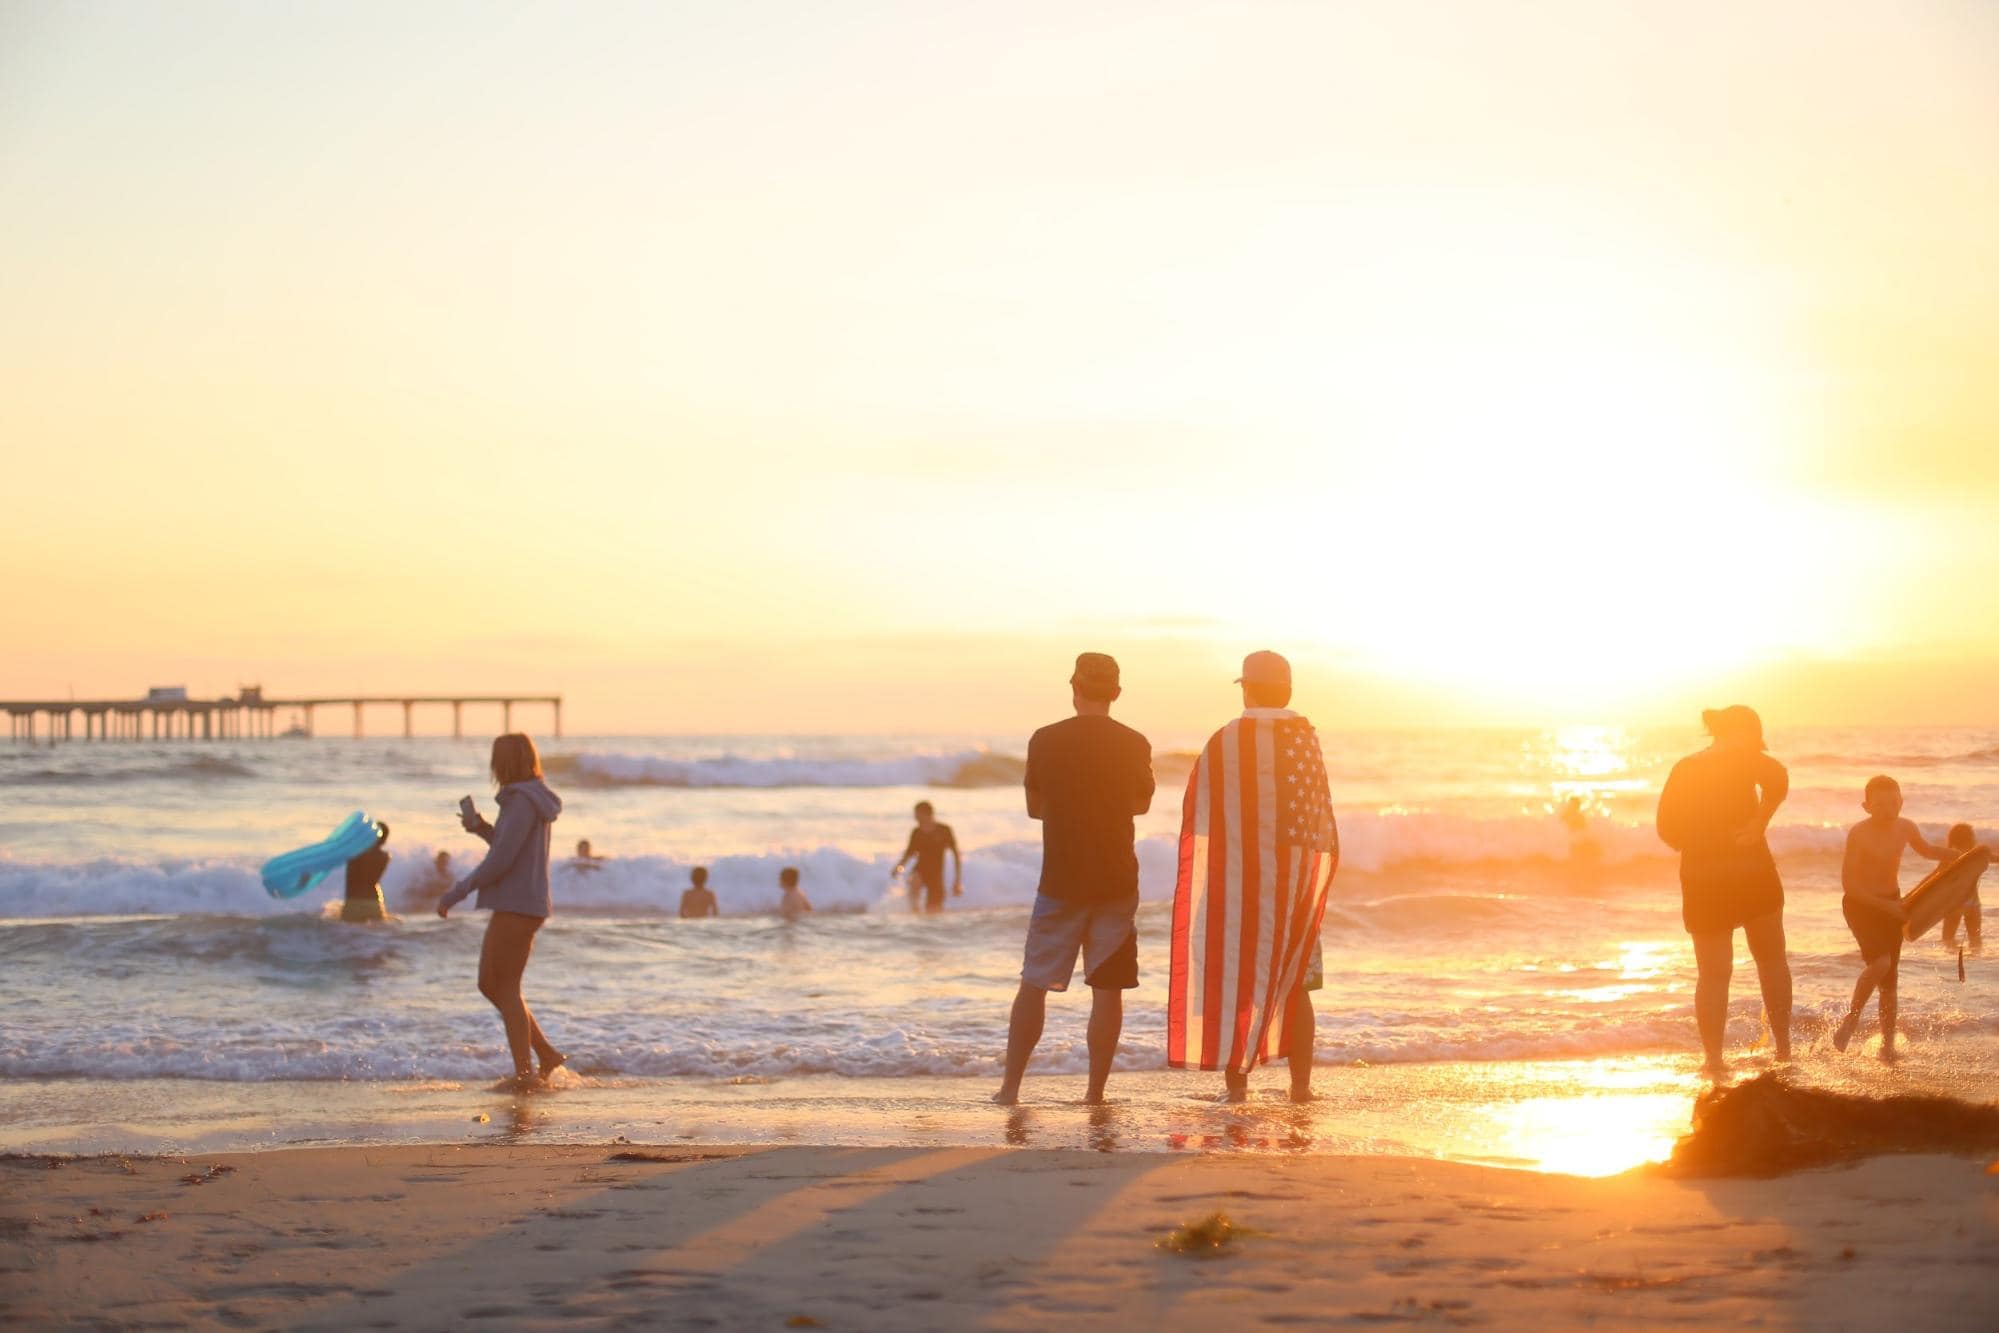 People at beach with person holding the flag of the united states during a sunset